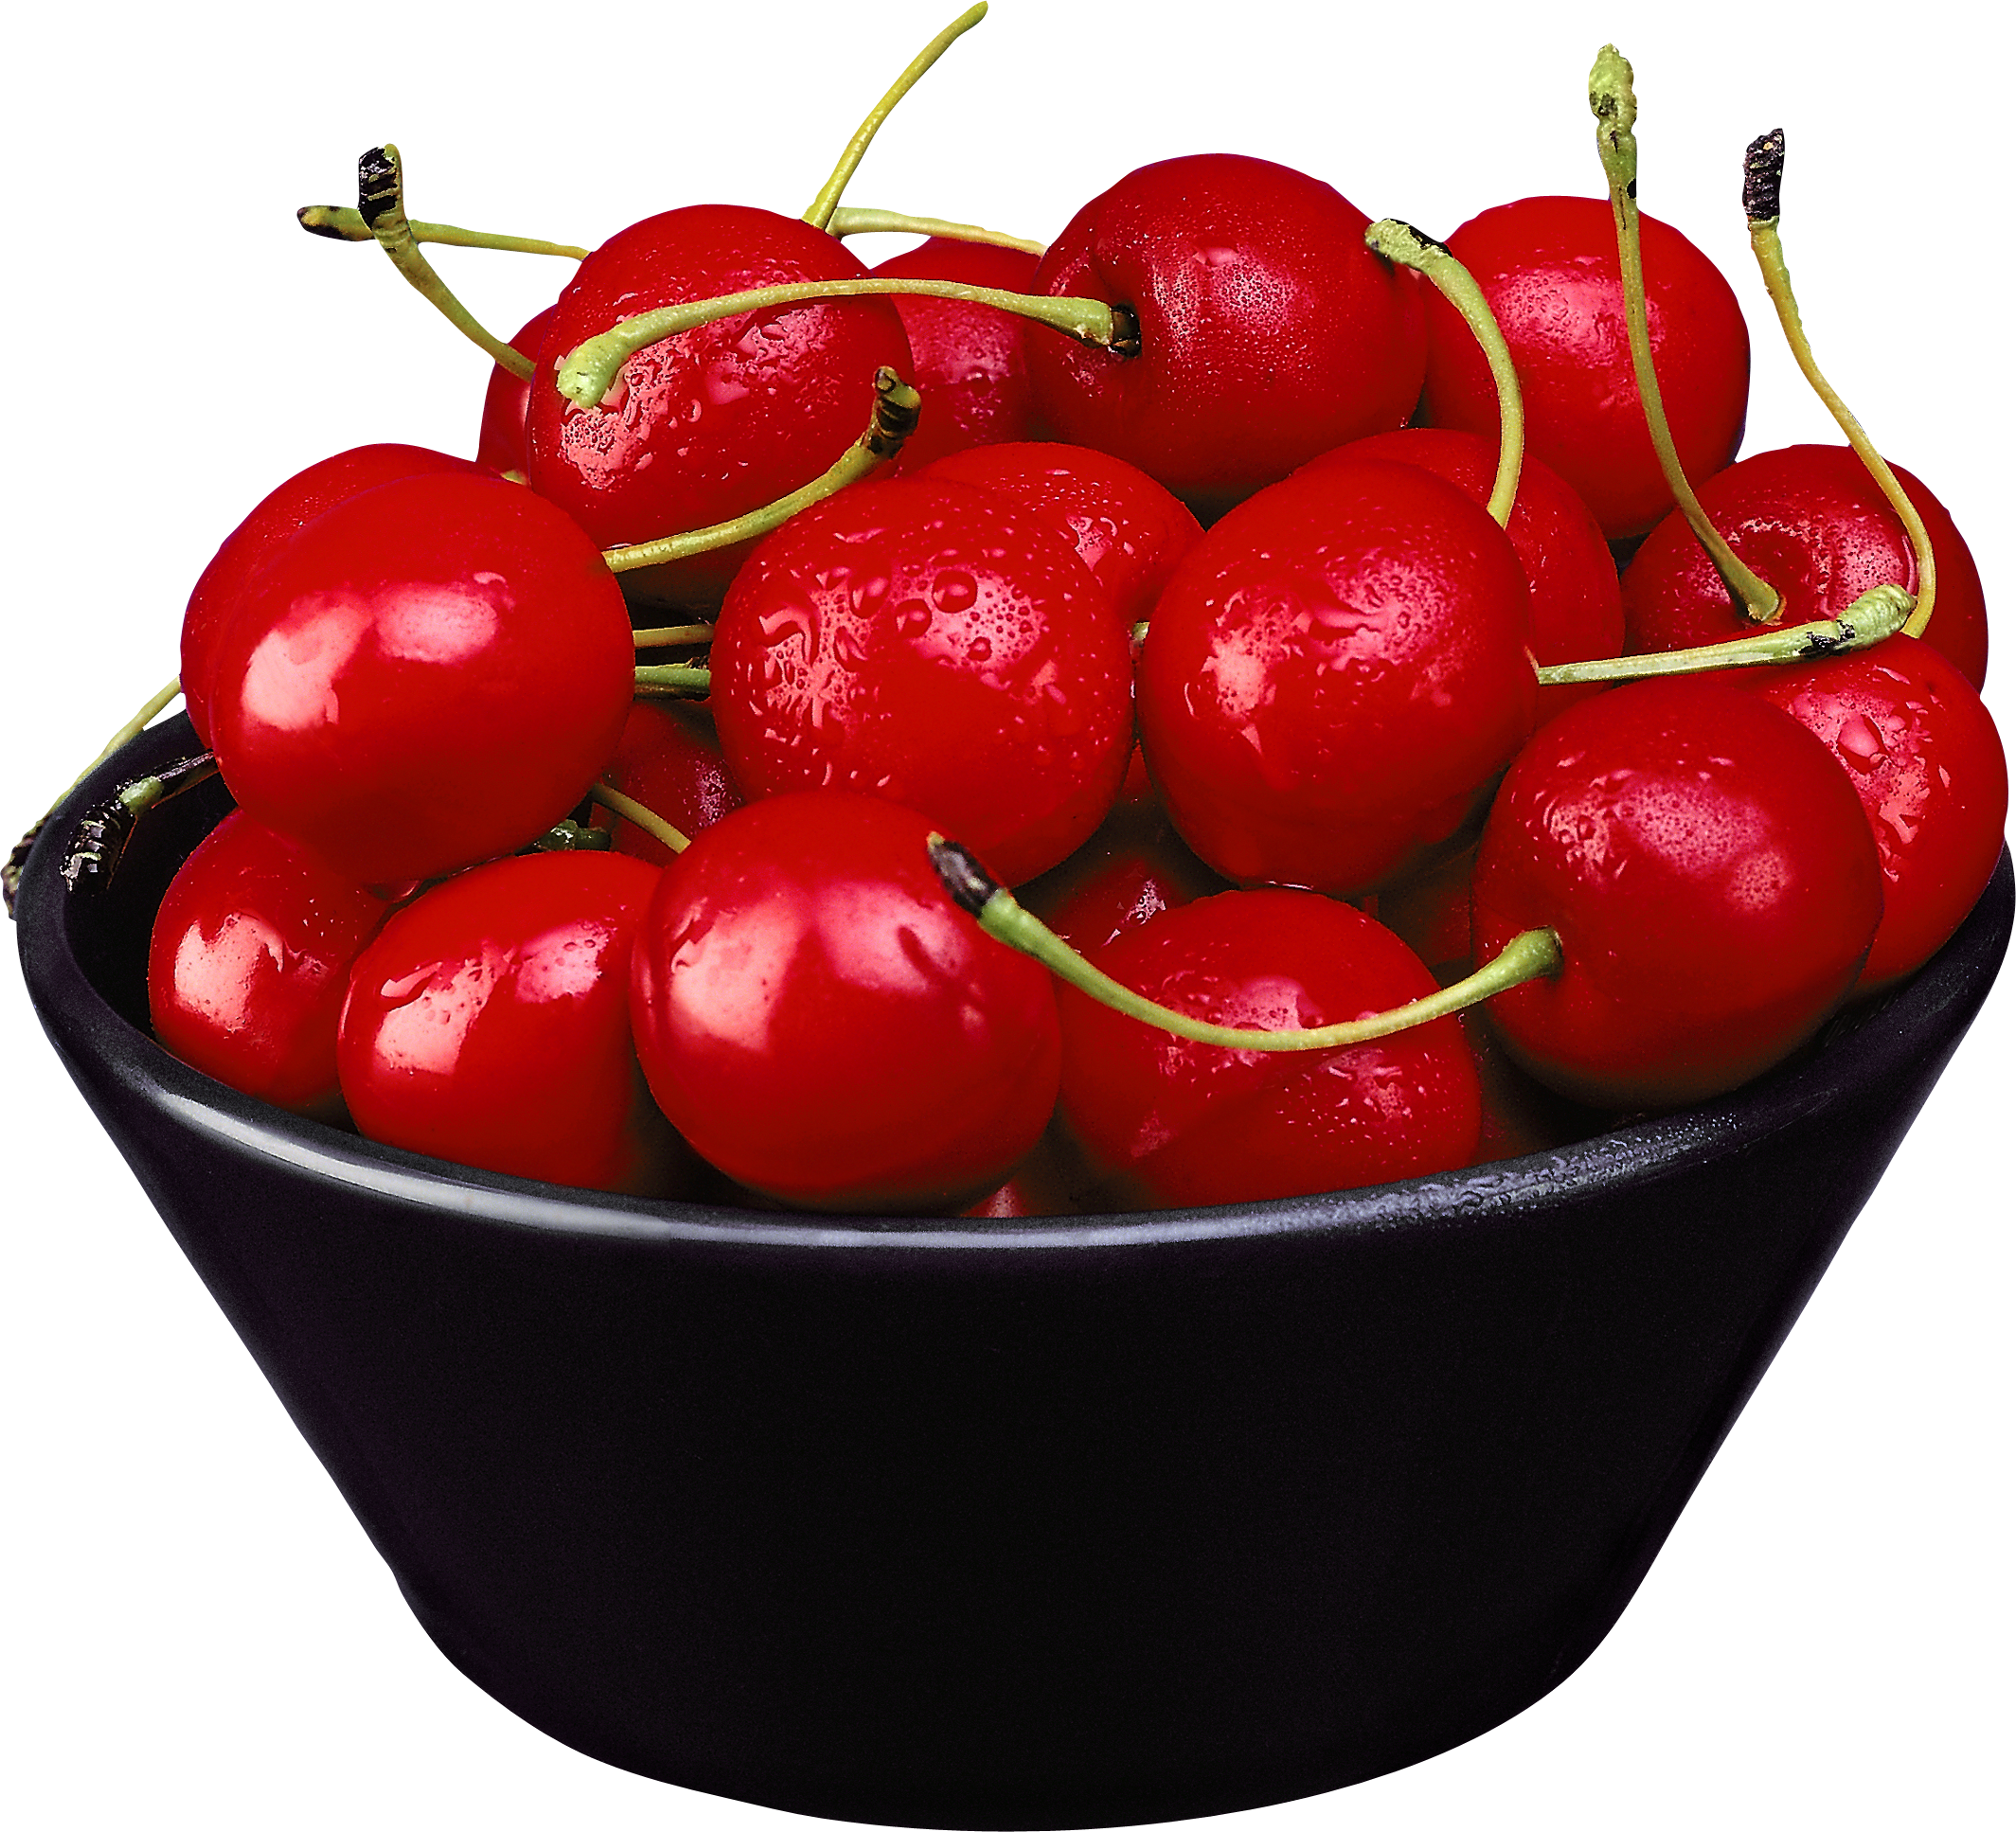 cherry PNG image